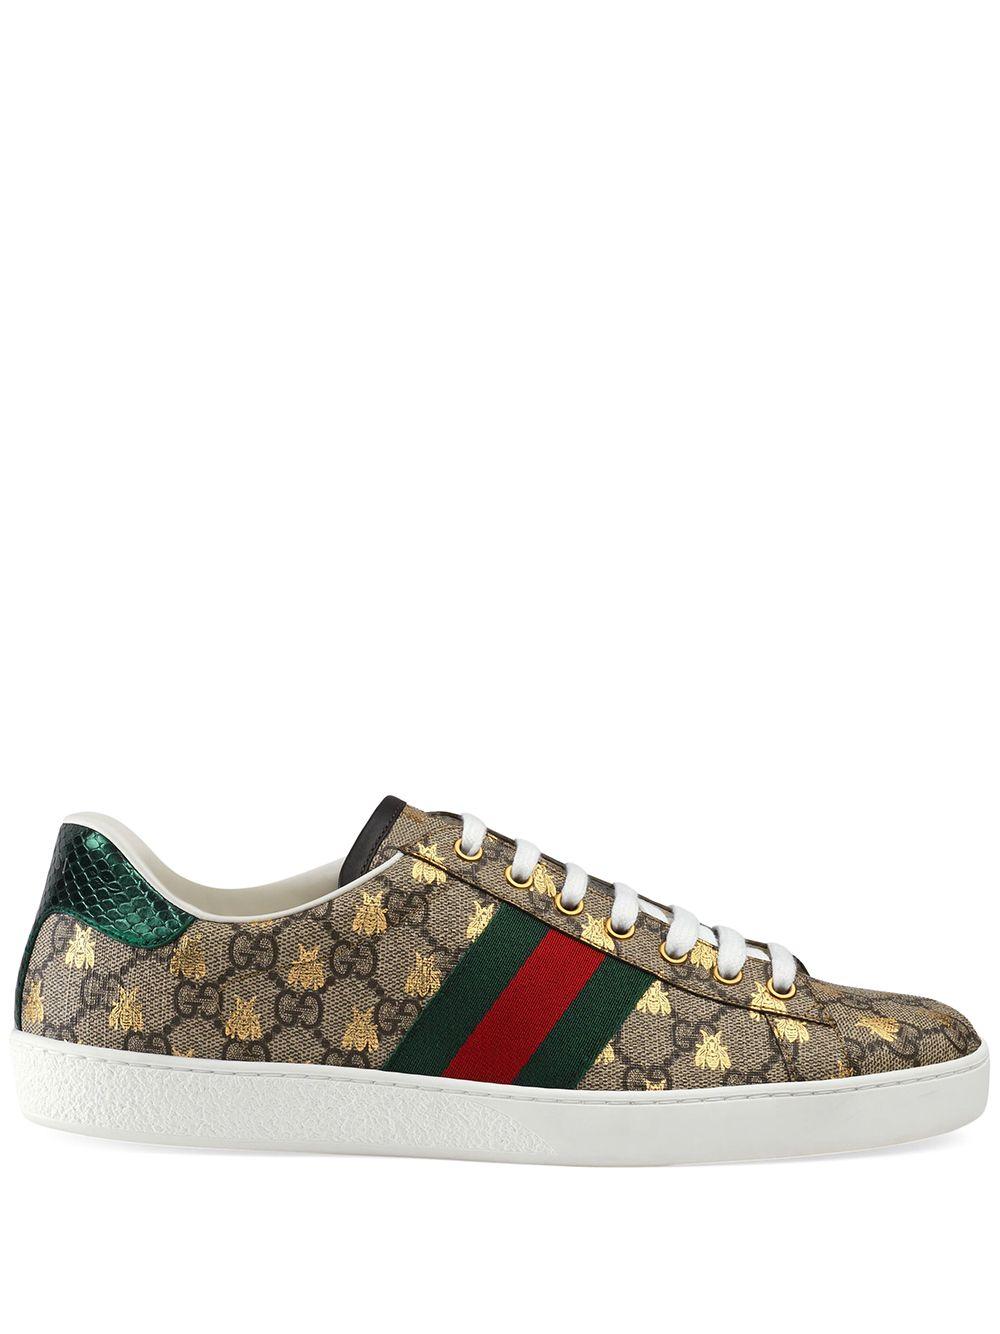 Gucci Leather Ace gg Supreme Bees Sneaker in Beige (Natural) for Men - Save  34% - Lyst